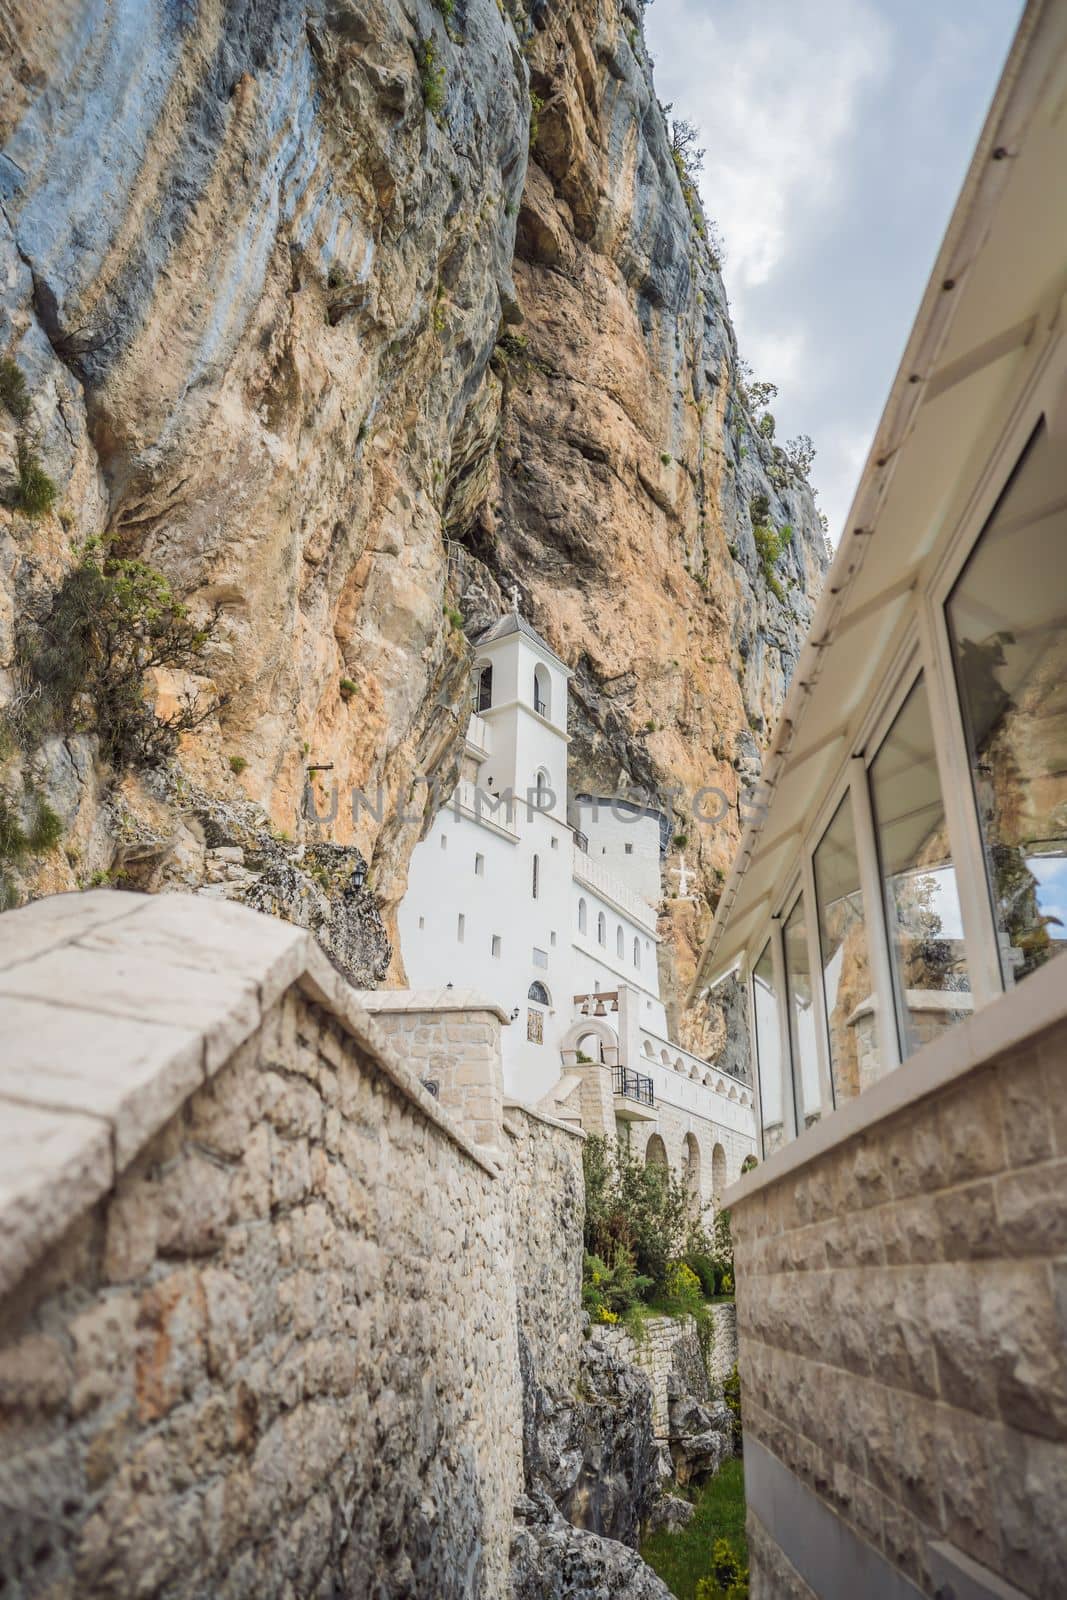 Monastery of Ostrog, Serbian Orthodox Church situated against a vertical background, high up in the large rock of Ostroska Greda, Montenegro. Dedicated to Saint Basil of Ostrog by galitskaya